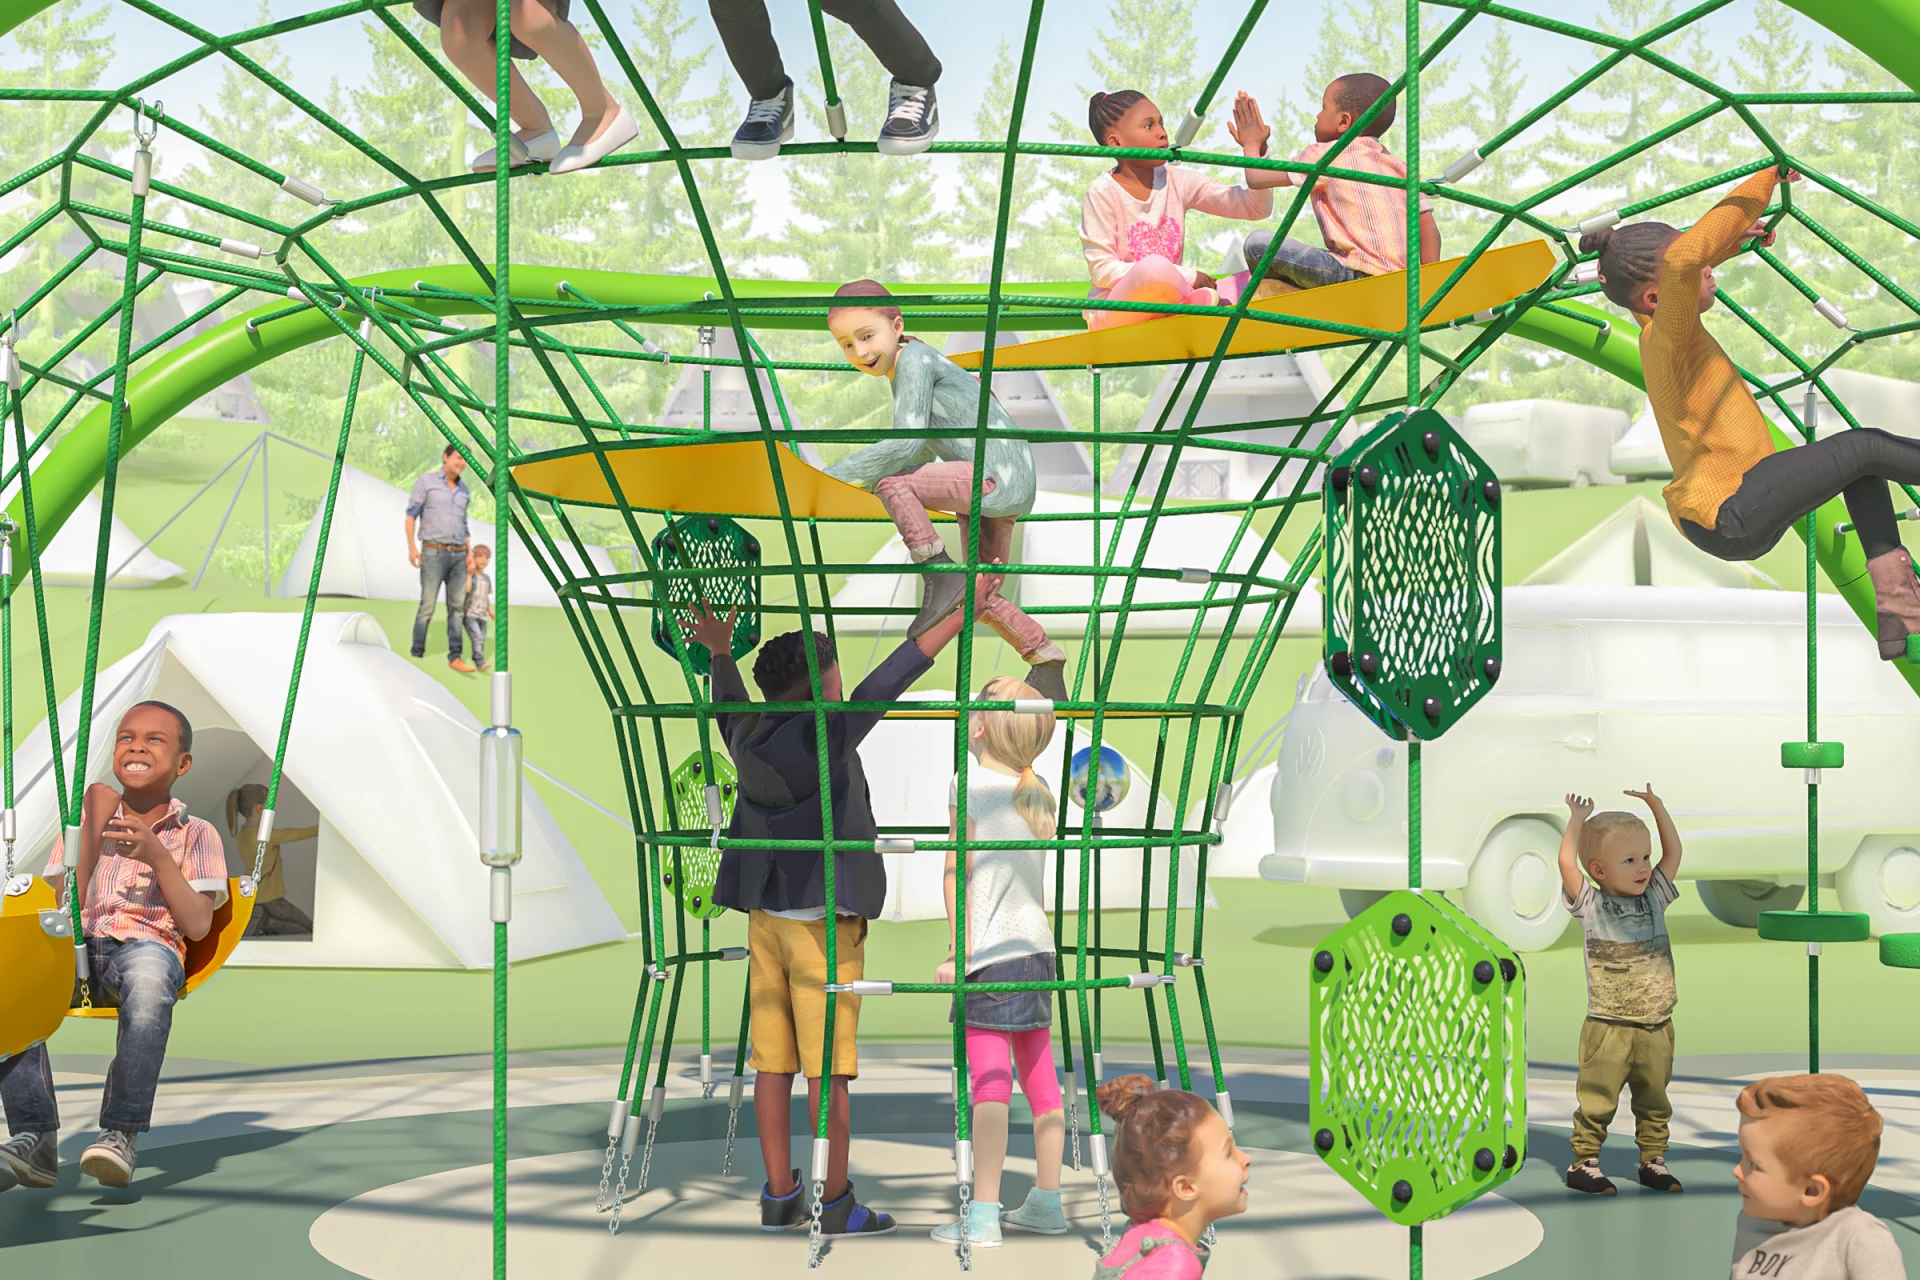 Children play around a loop play structure